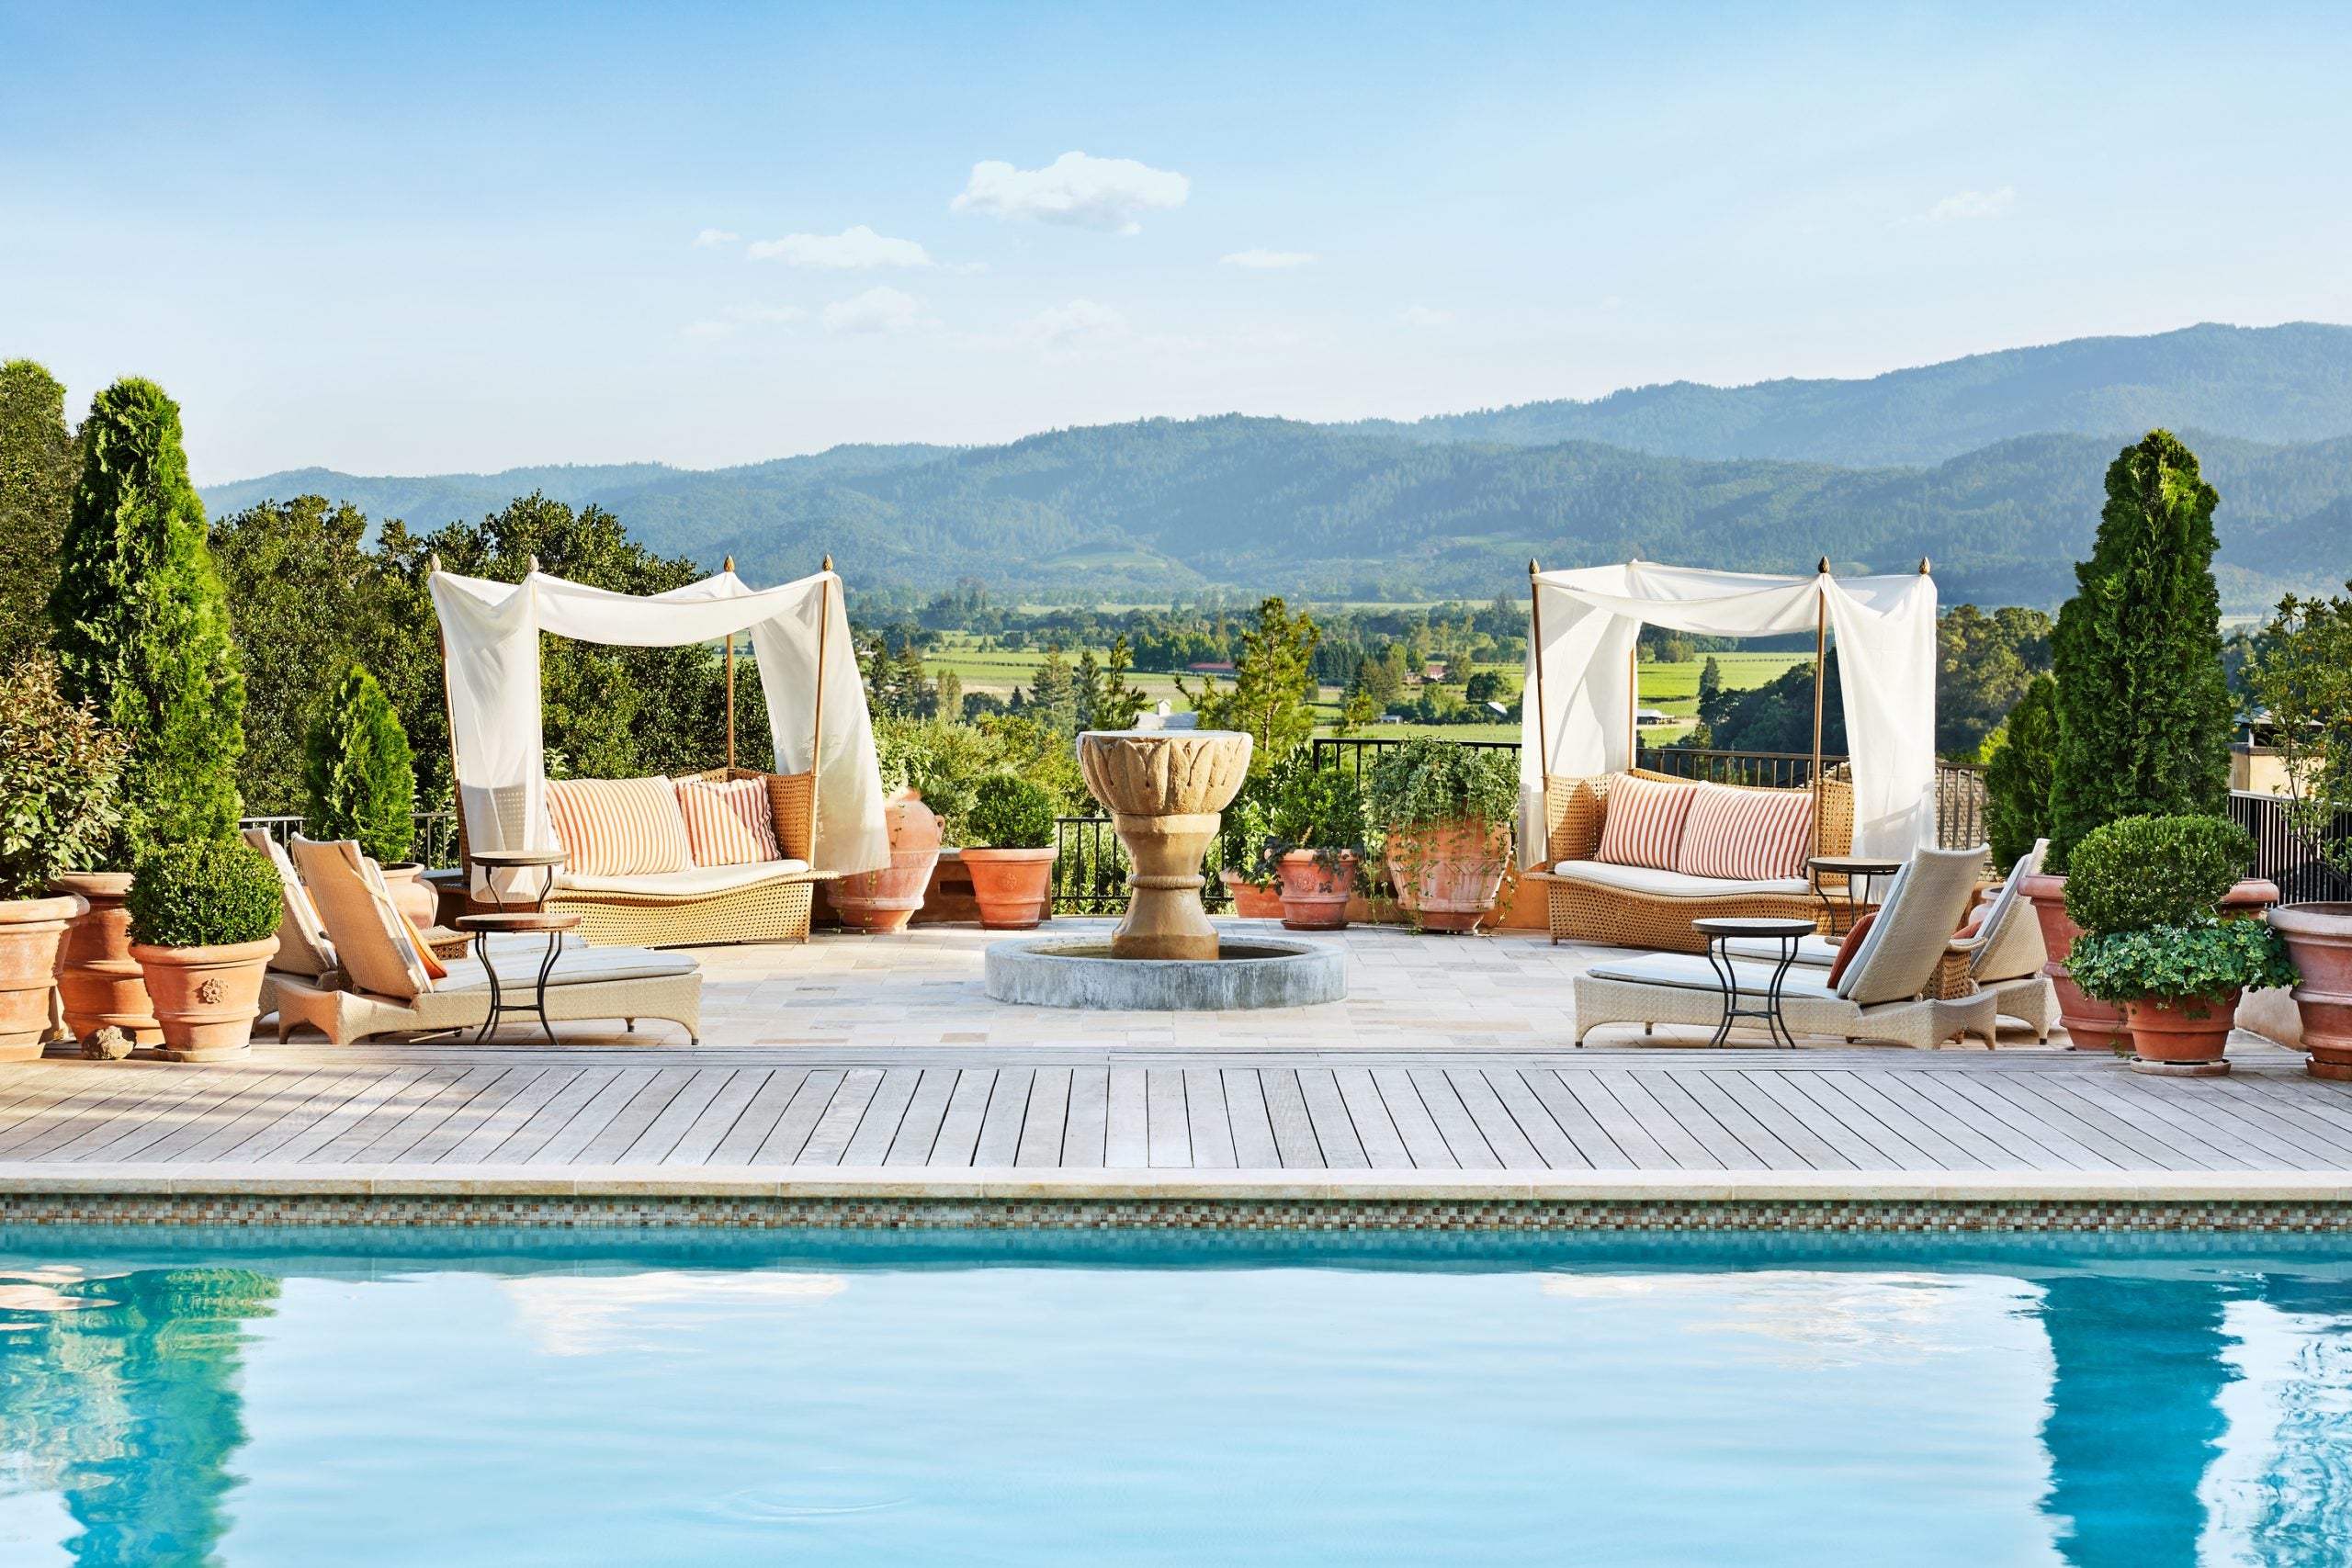 Swimming pool at luxury resort with cabanas overlooking Napa Valley, California